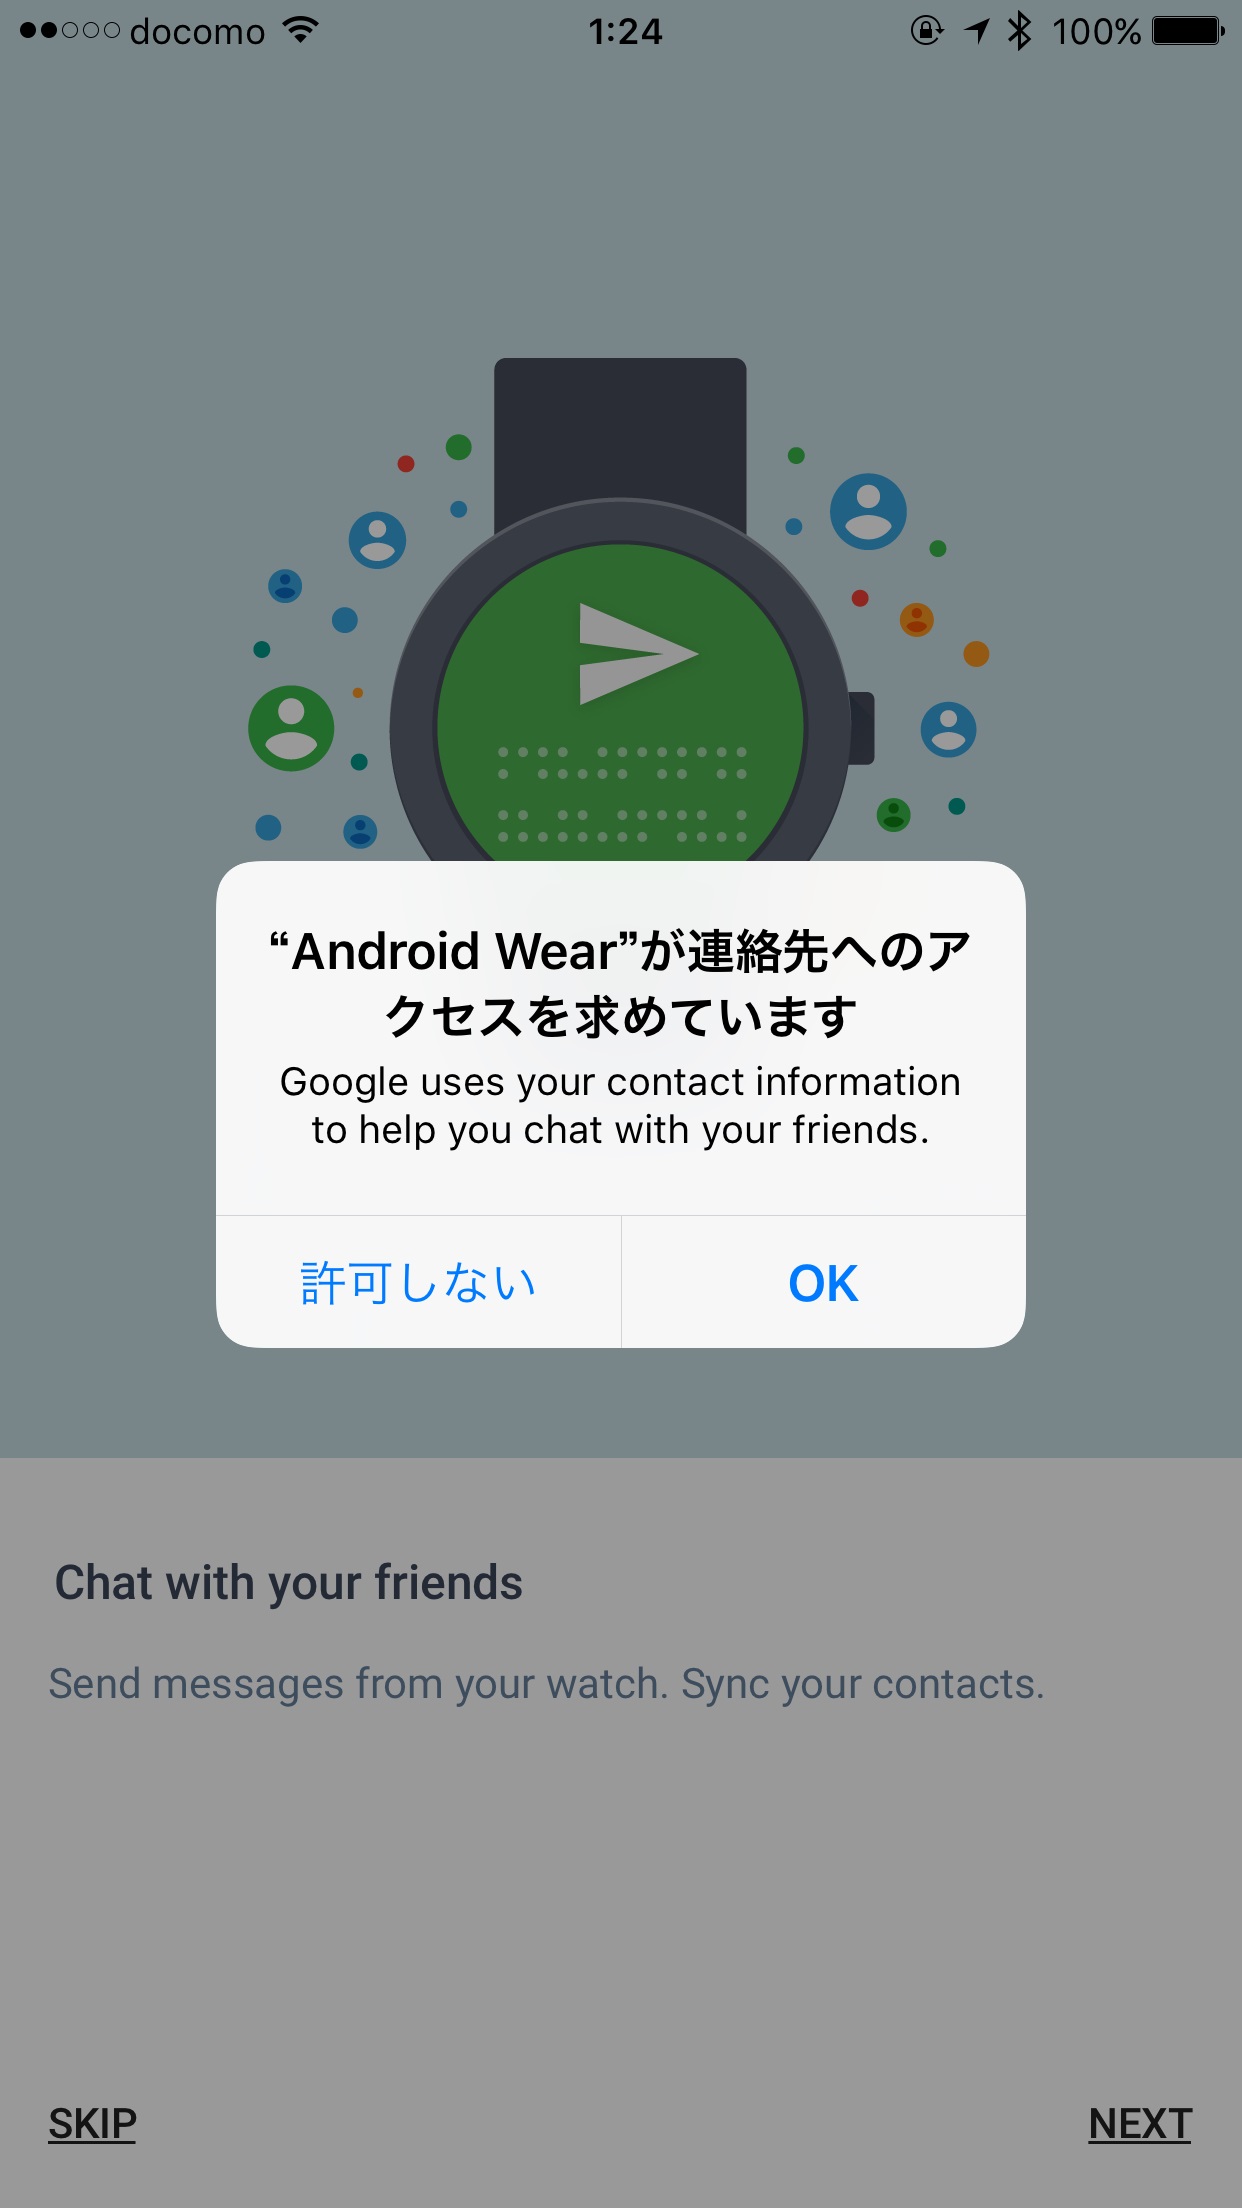 Android Wear をiphoneとペアリングする手順 Google Help Heroes By Jetstream